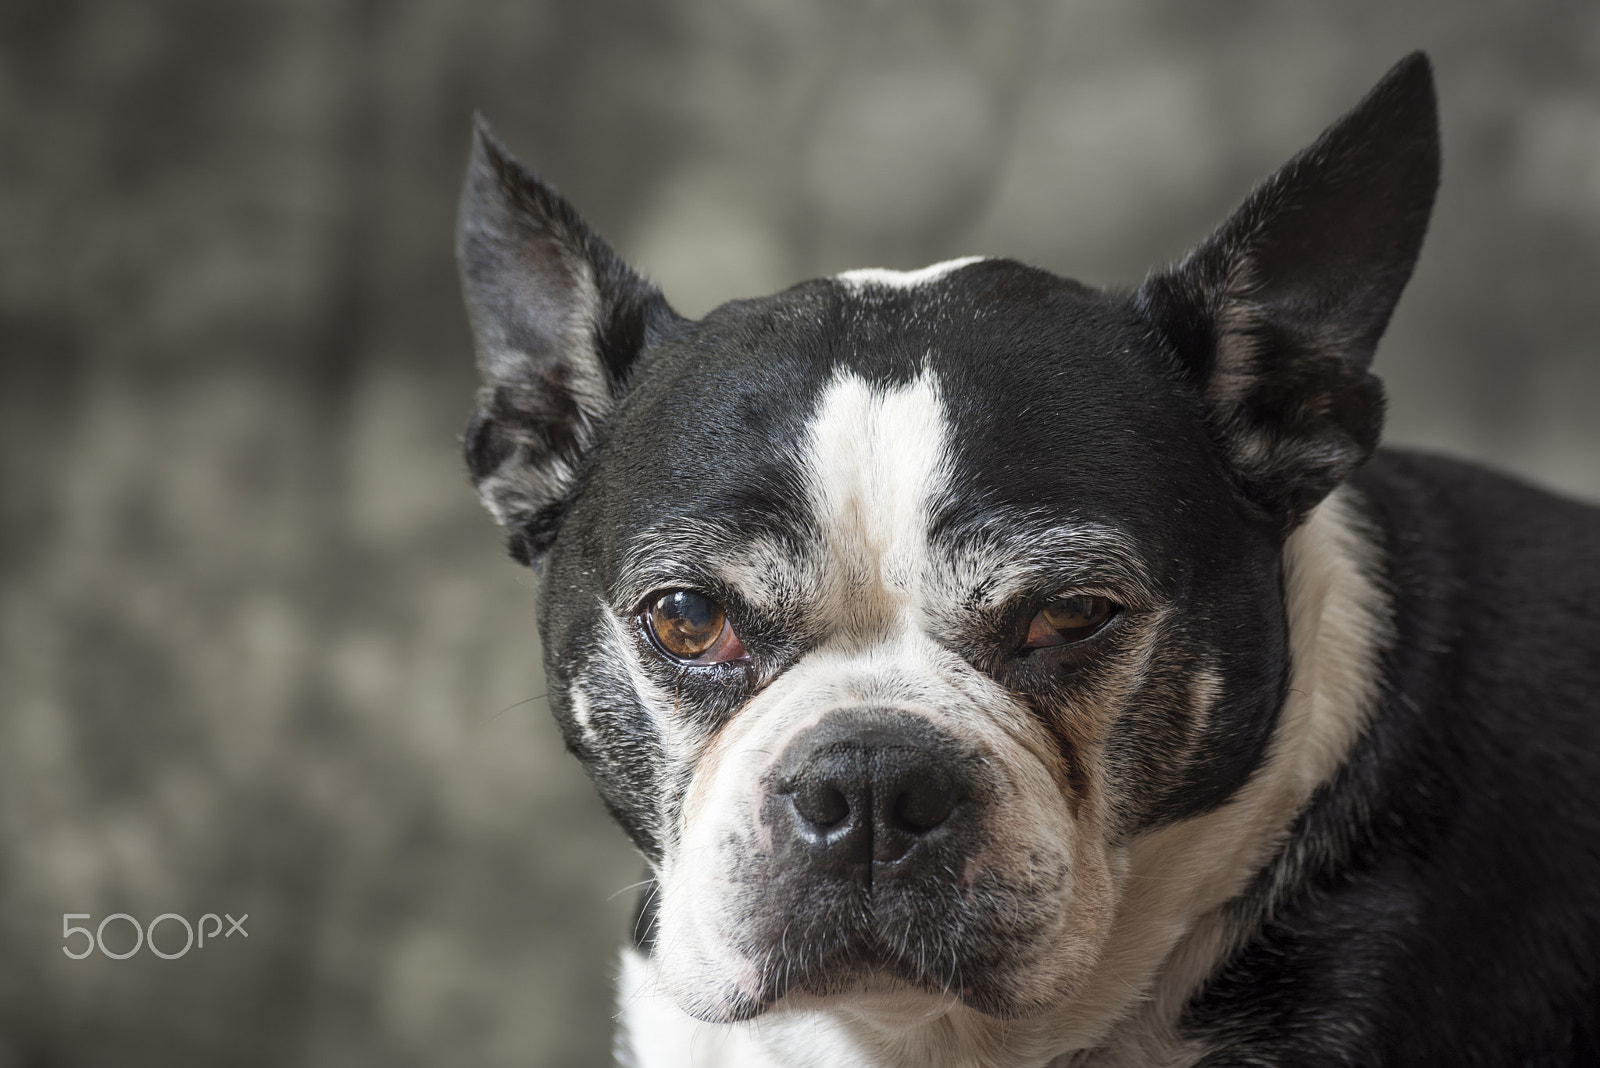 Nikon D810 sample photo. Old but cute boston terrier dog in the studio photography